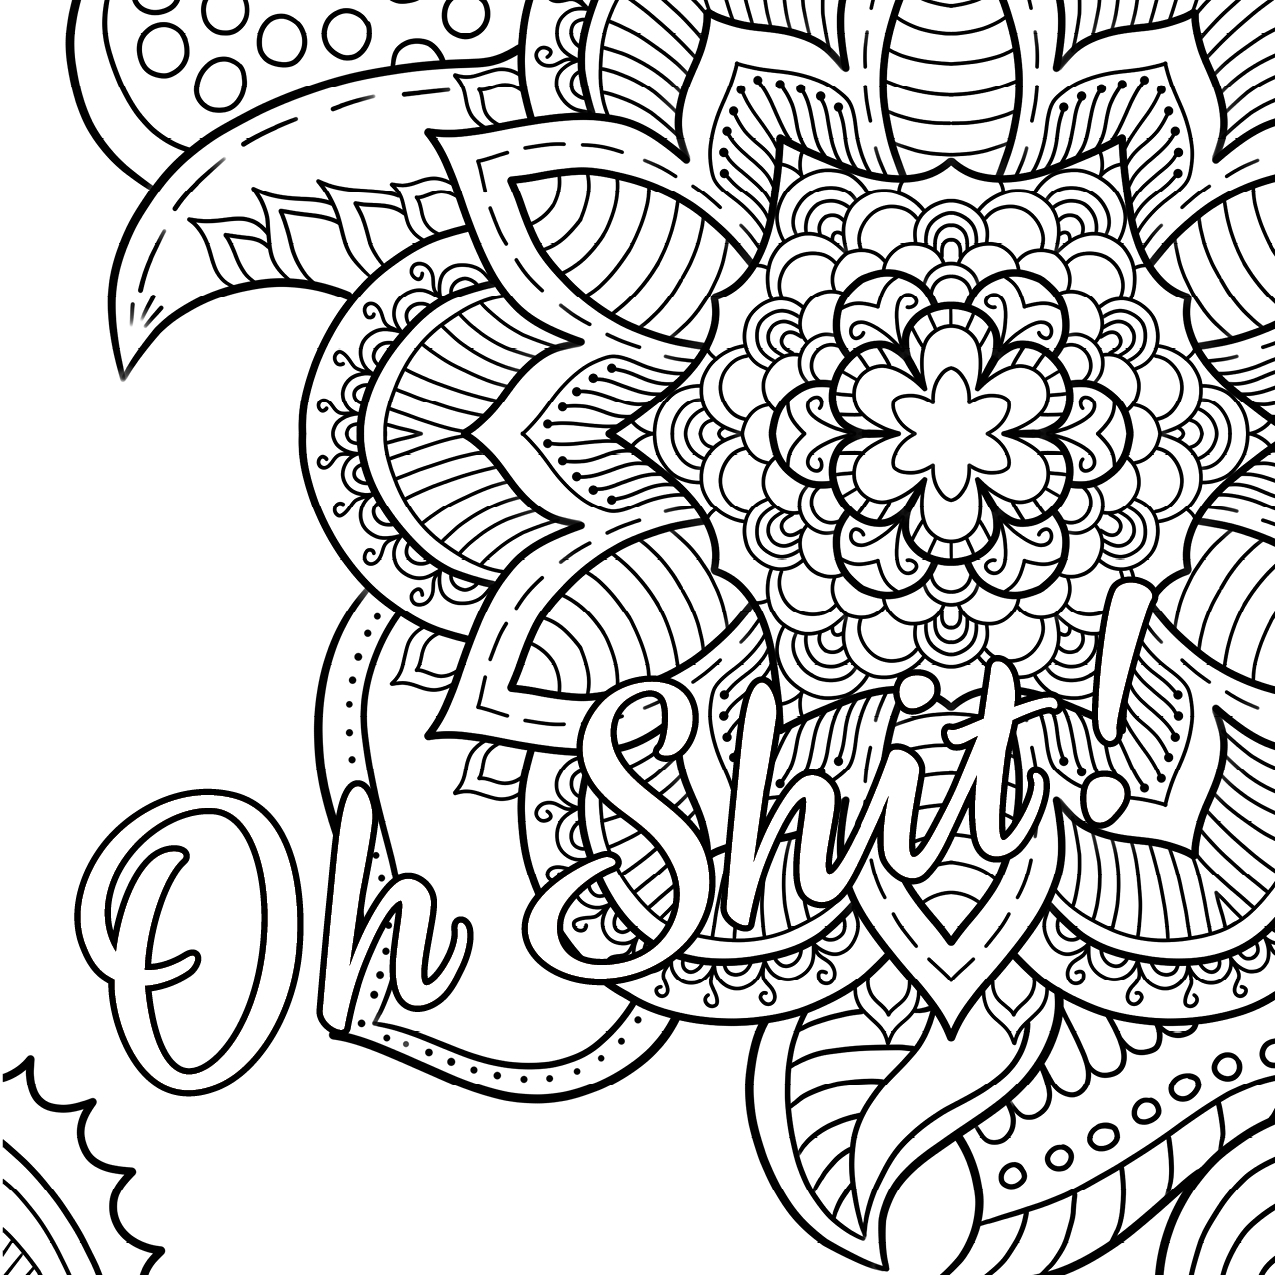 Free Printable Coloring Pages For Adults Only Swear Words Gallery - Free Printable Coloring Pages For Adults Only Swear Words